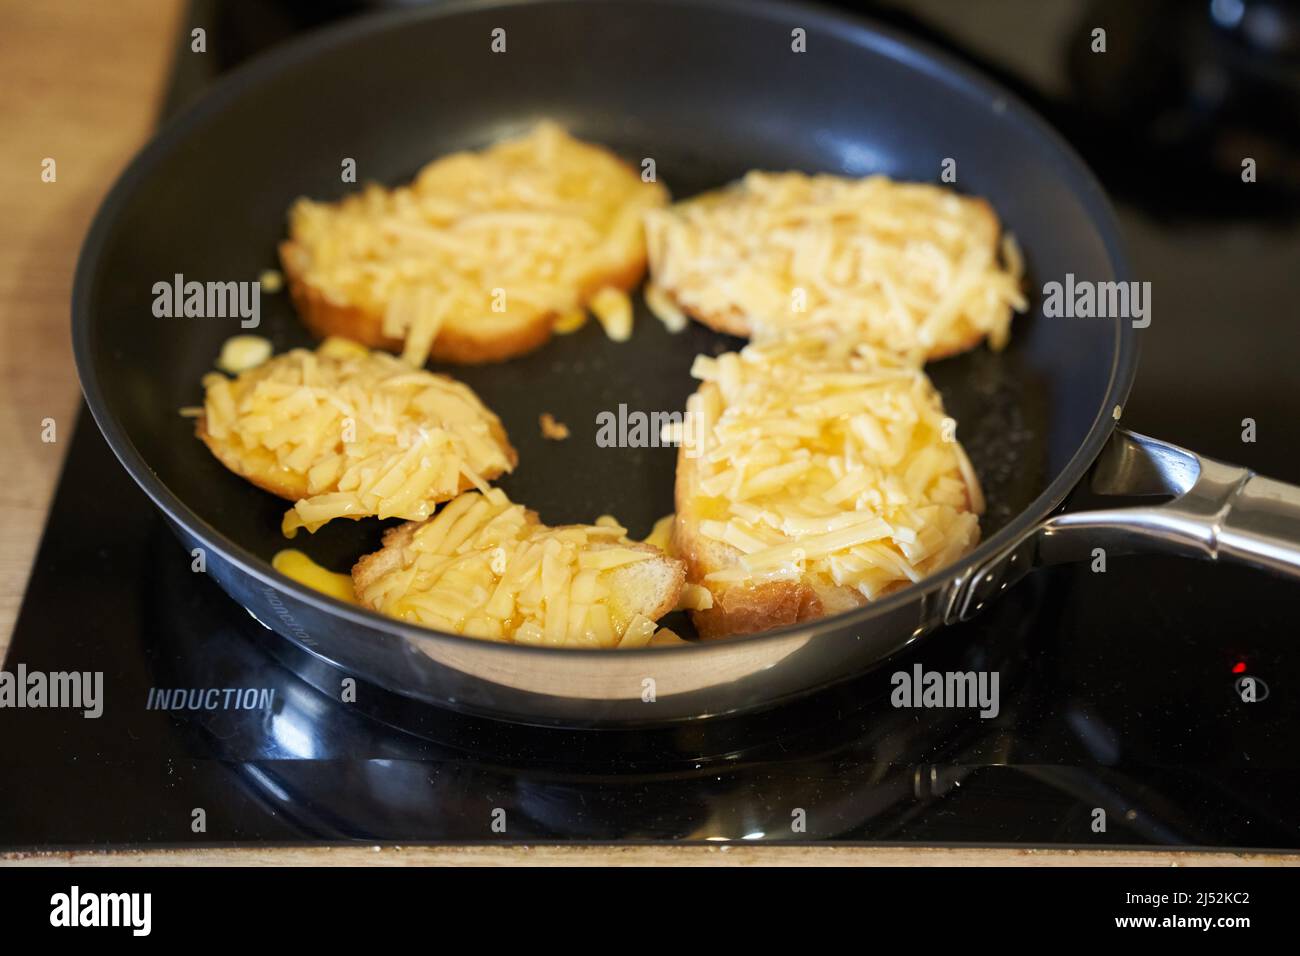 Delicious fried bread with an egg in a frying pan. Hot homemade sandwich step-by-step preparation. High quality photo Stock Photo